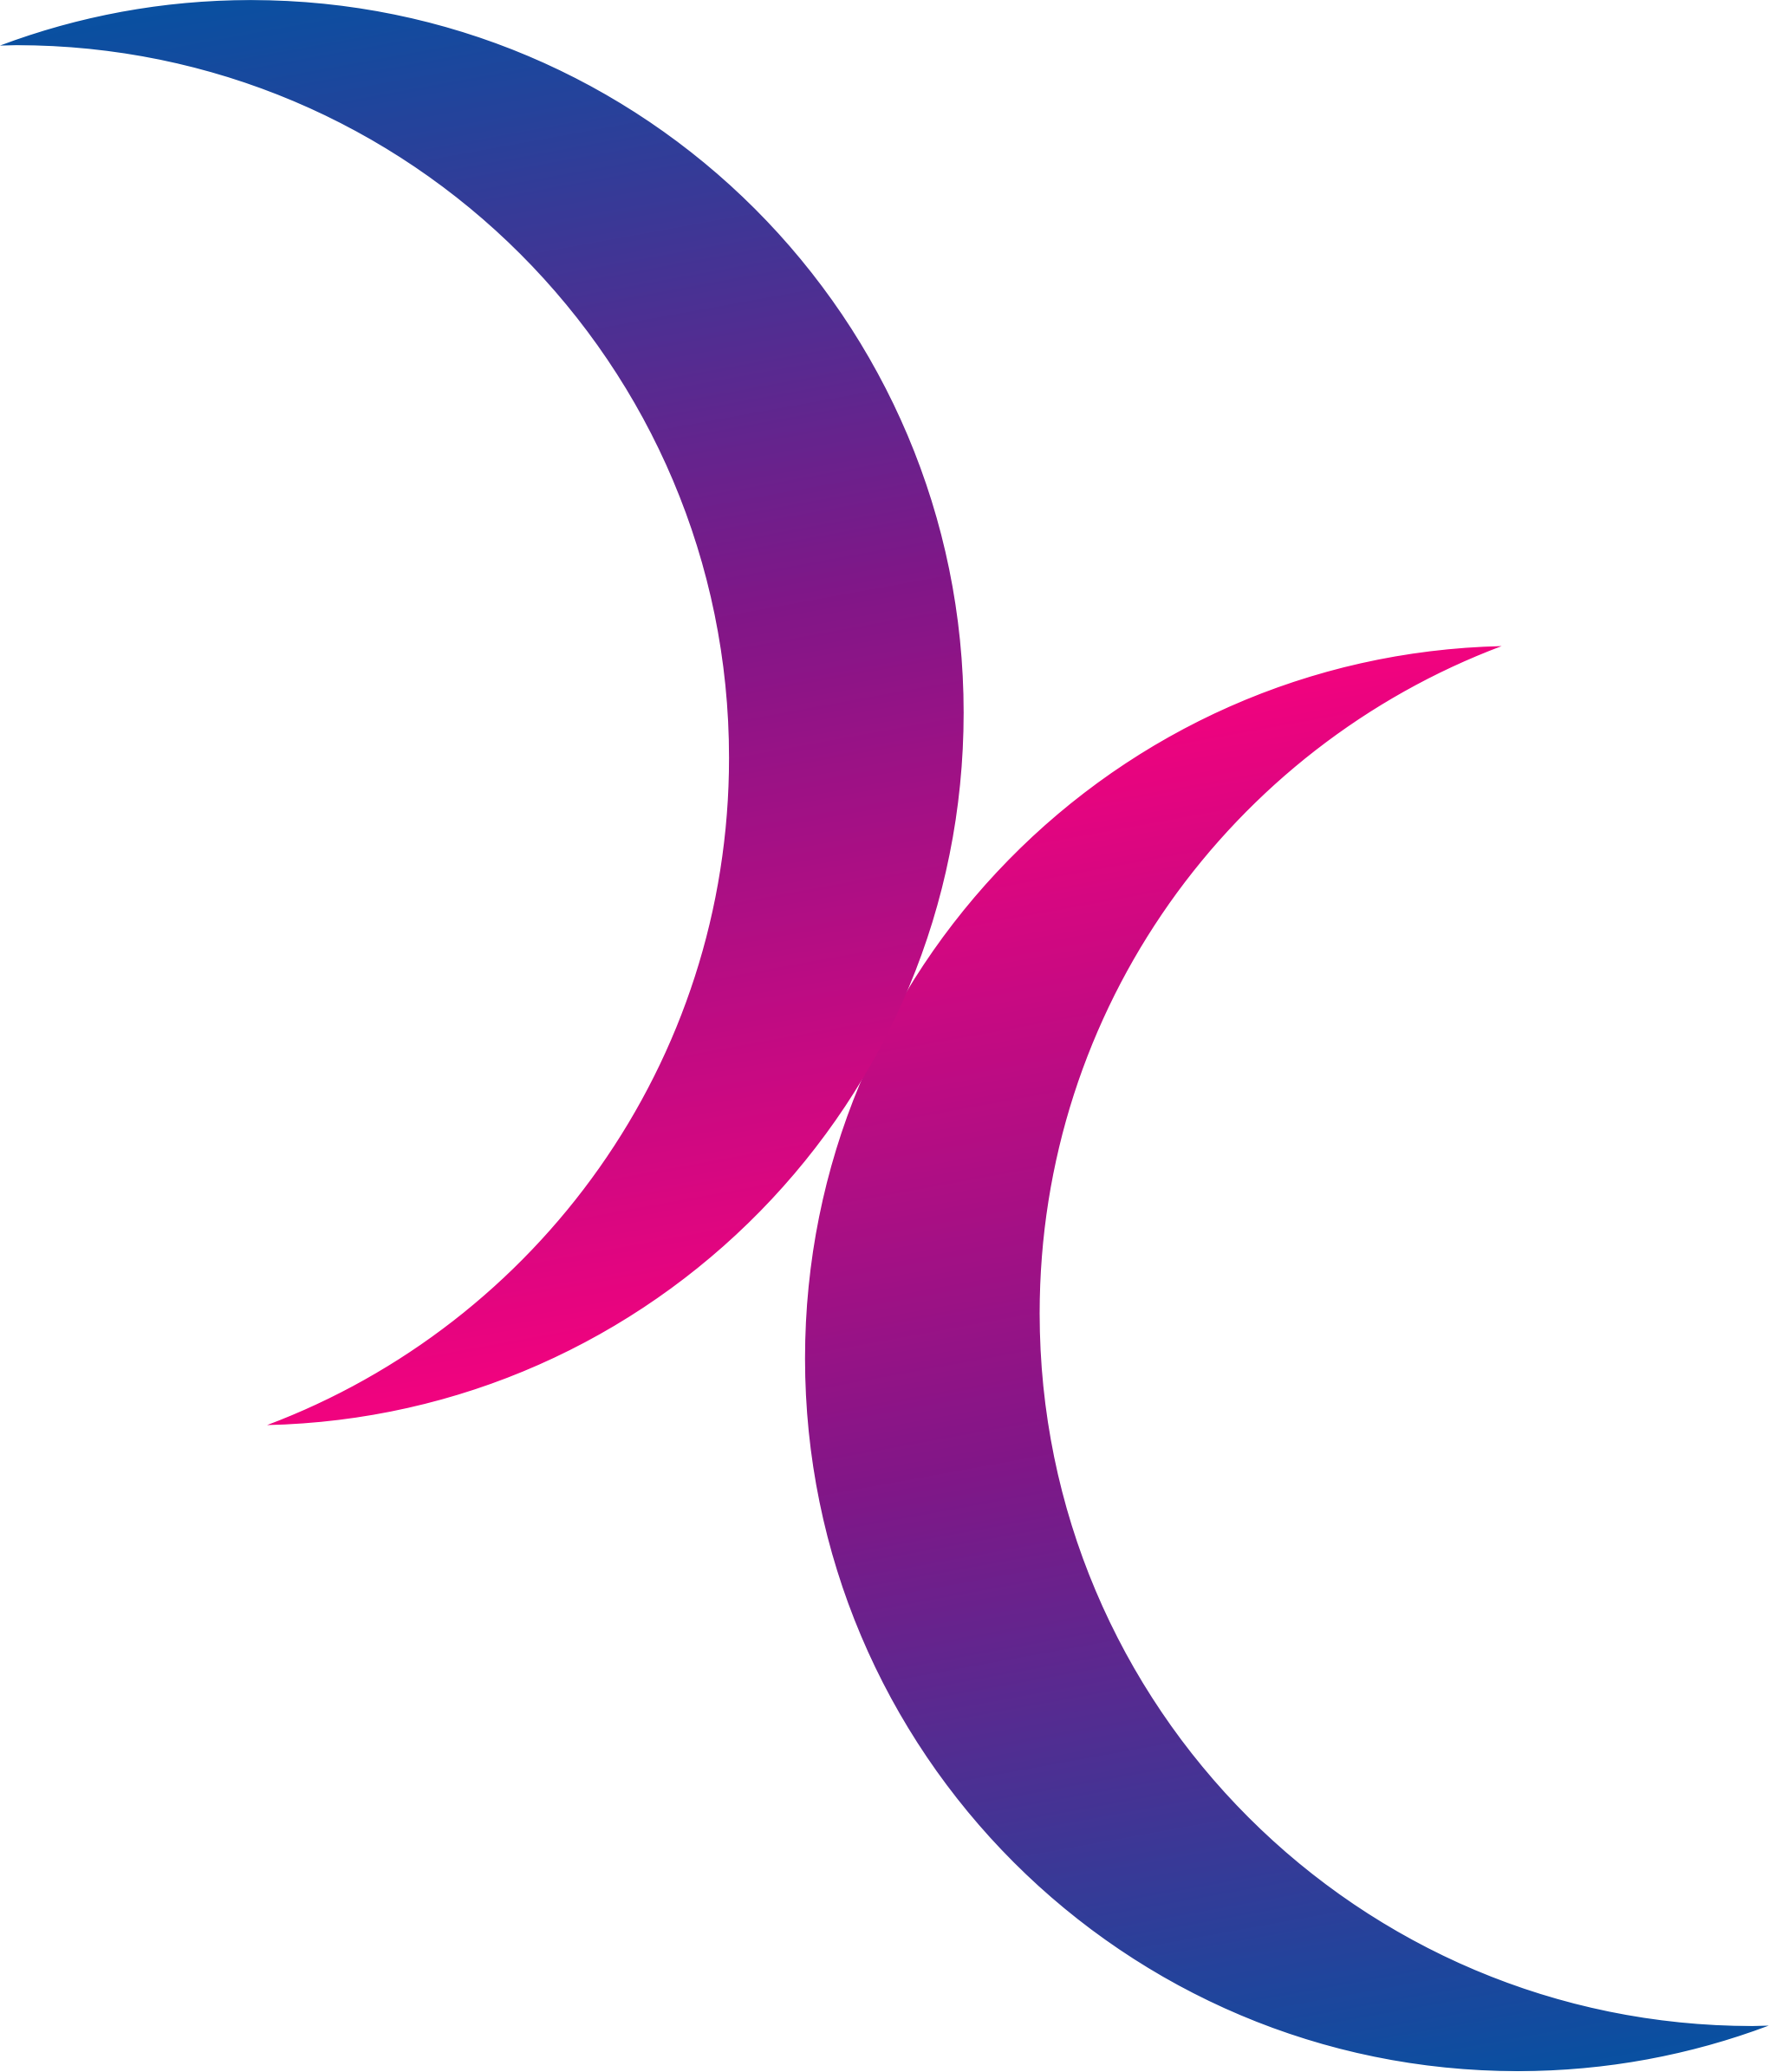 Almost Certainly Getting This - Bisexual Symbols (2041x2391)